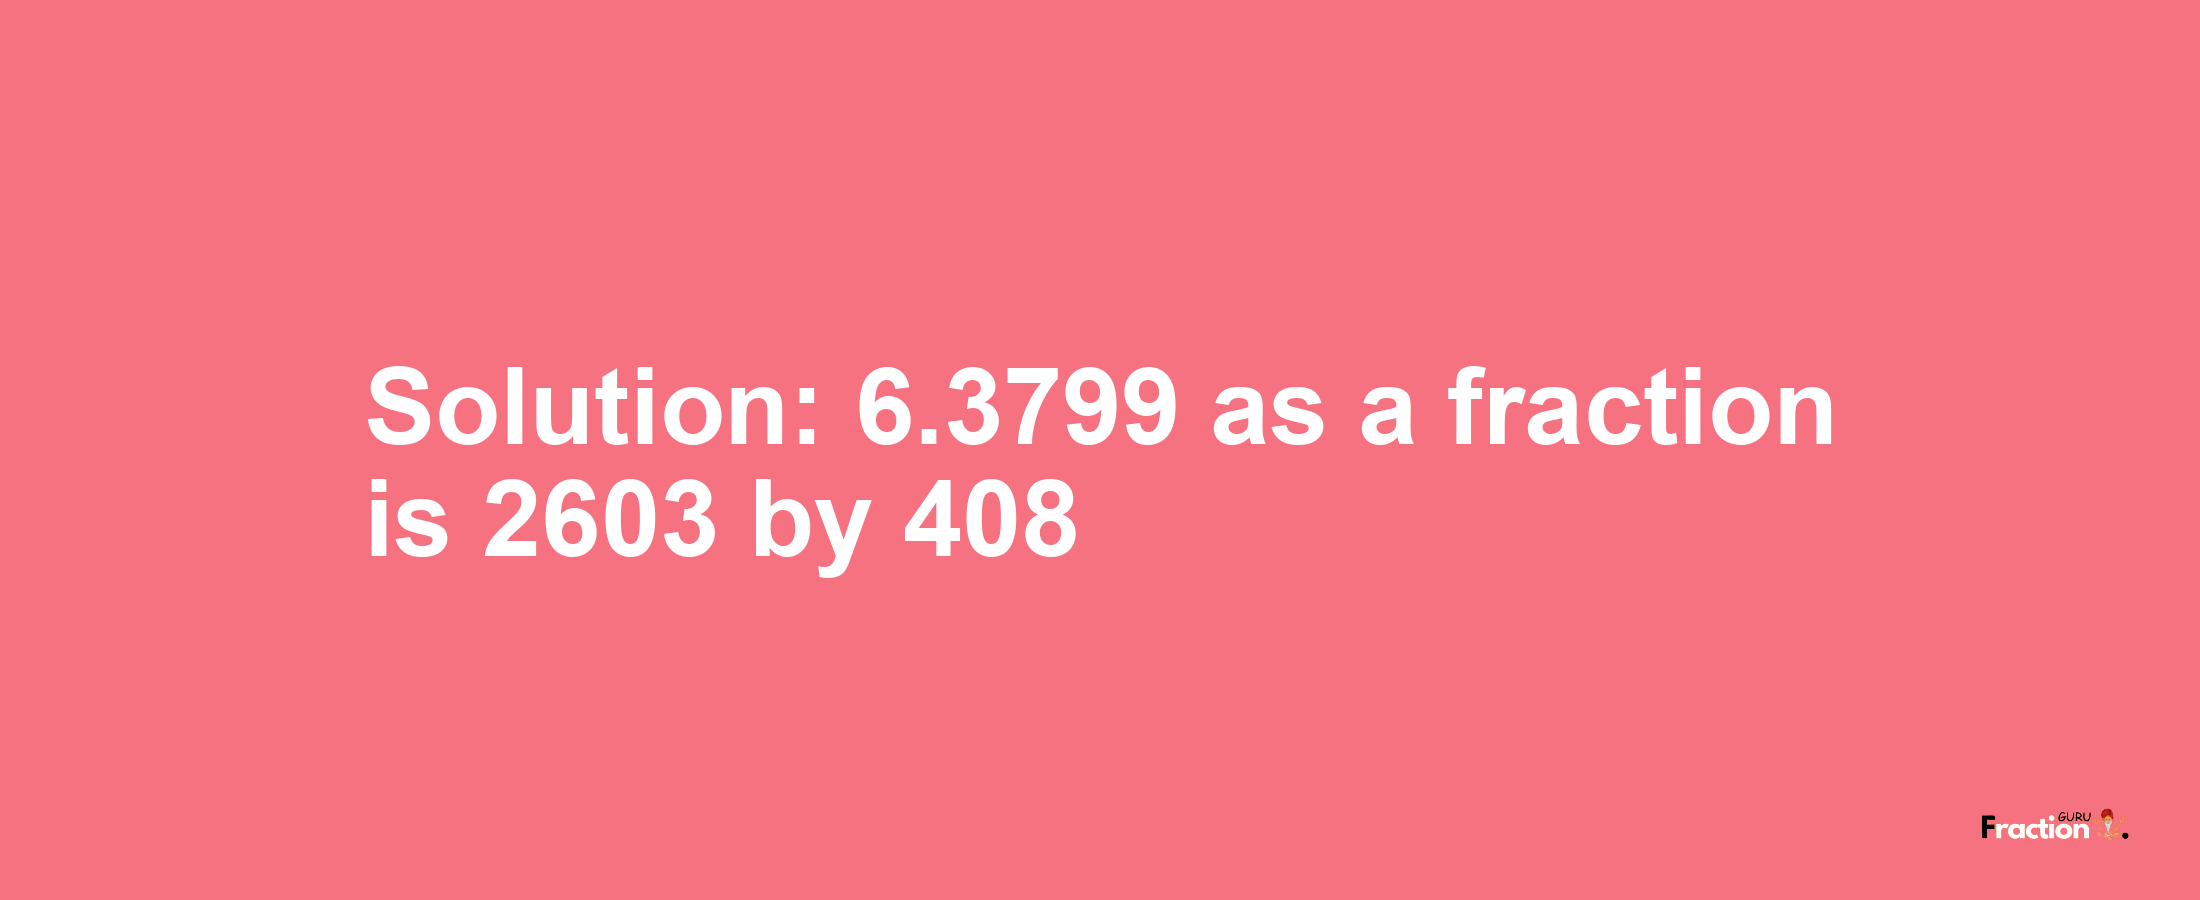 Solution:6.3799 as a fraction is 2603/408